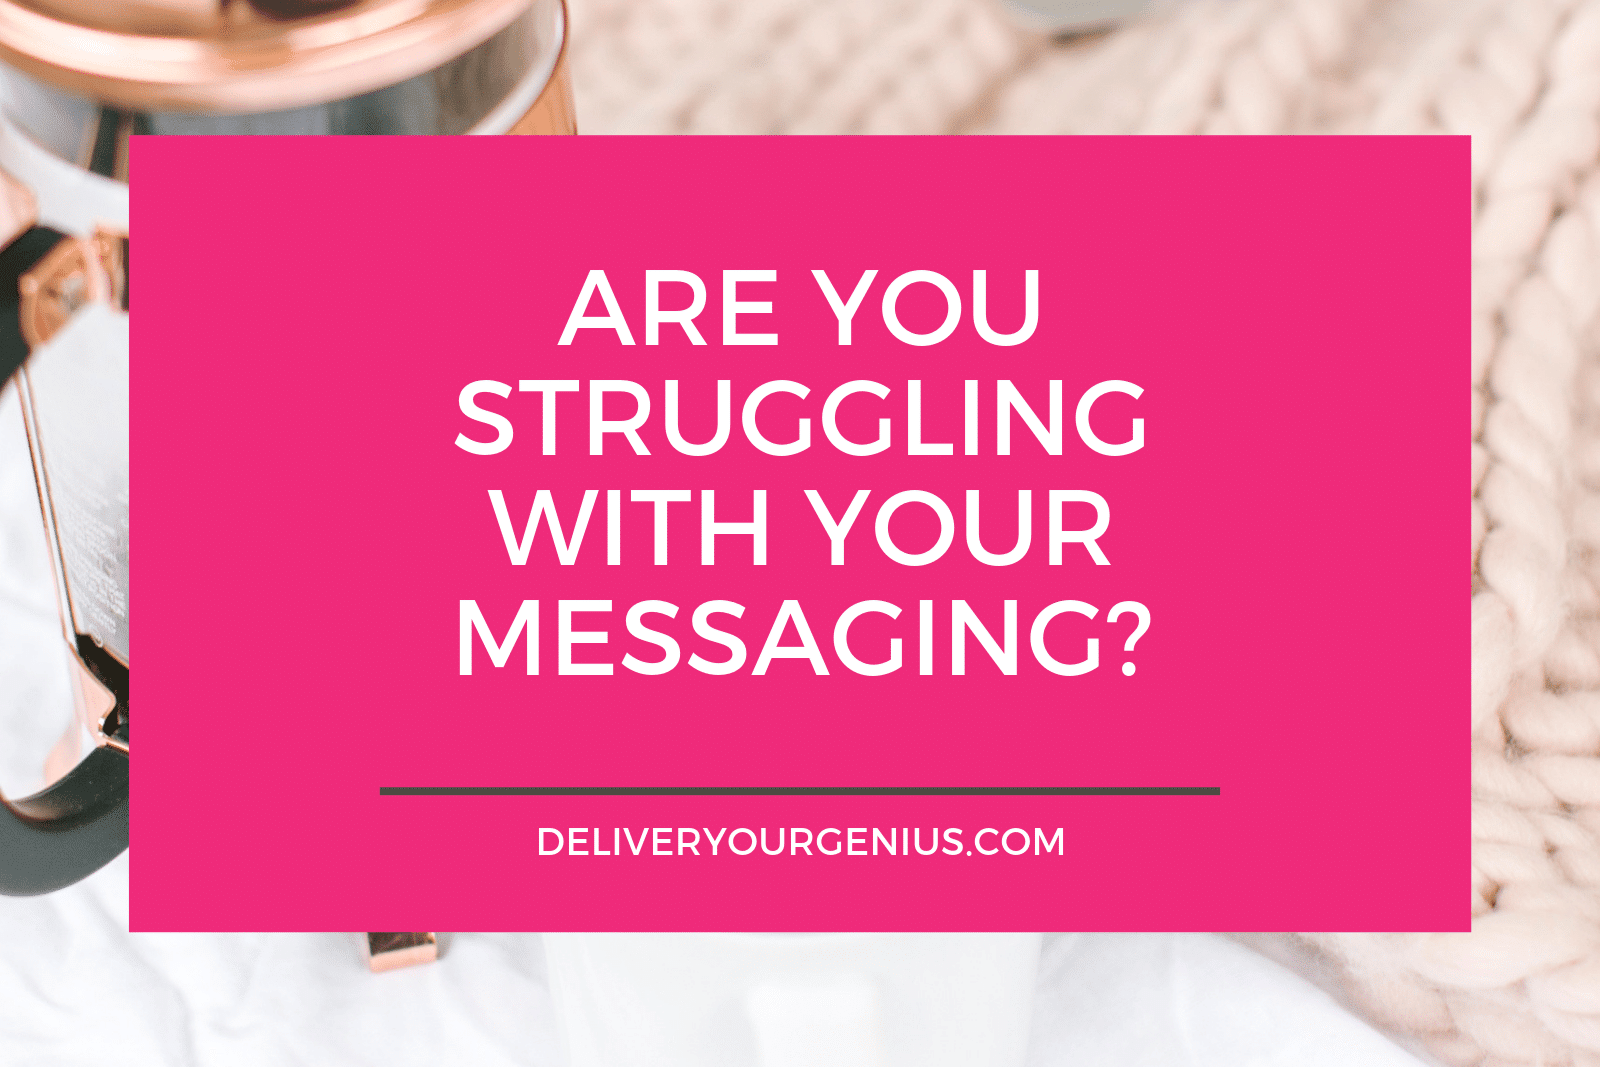 Are you struggling with your messaging?